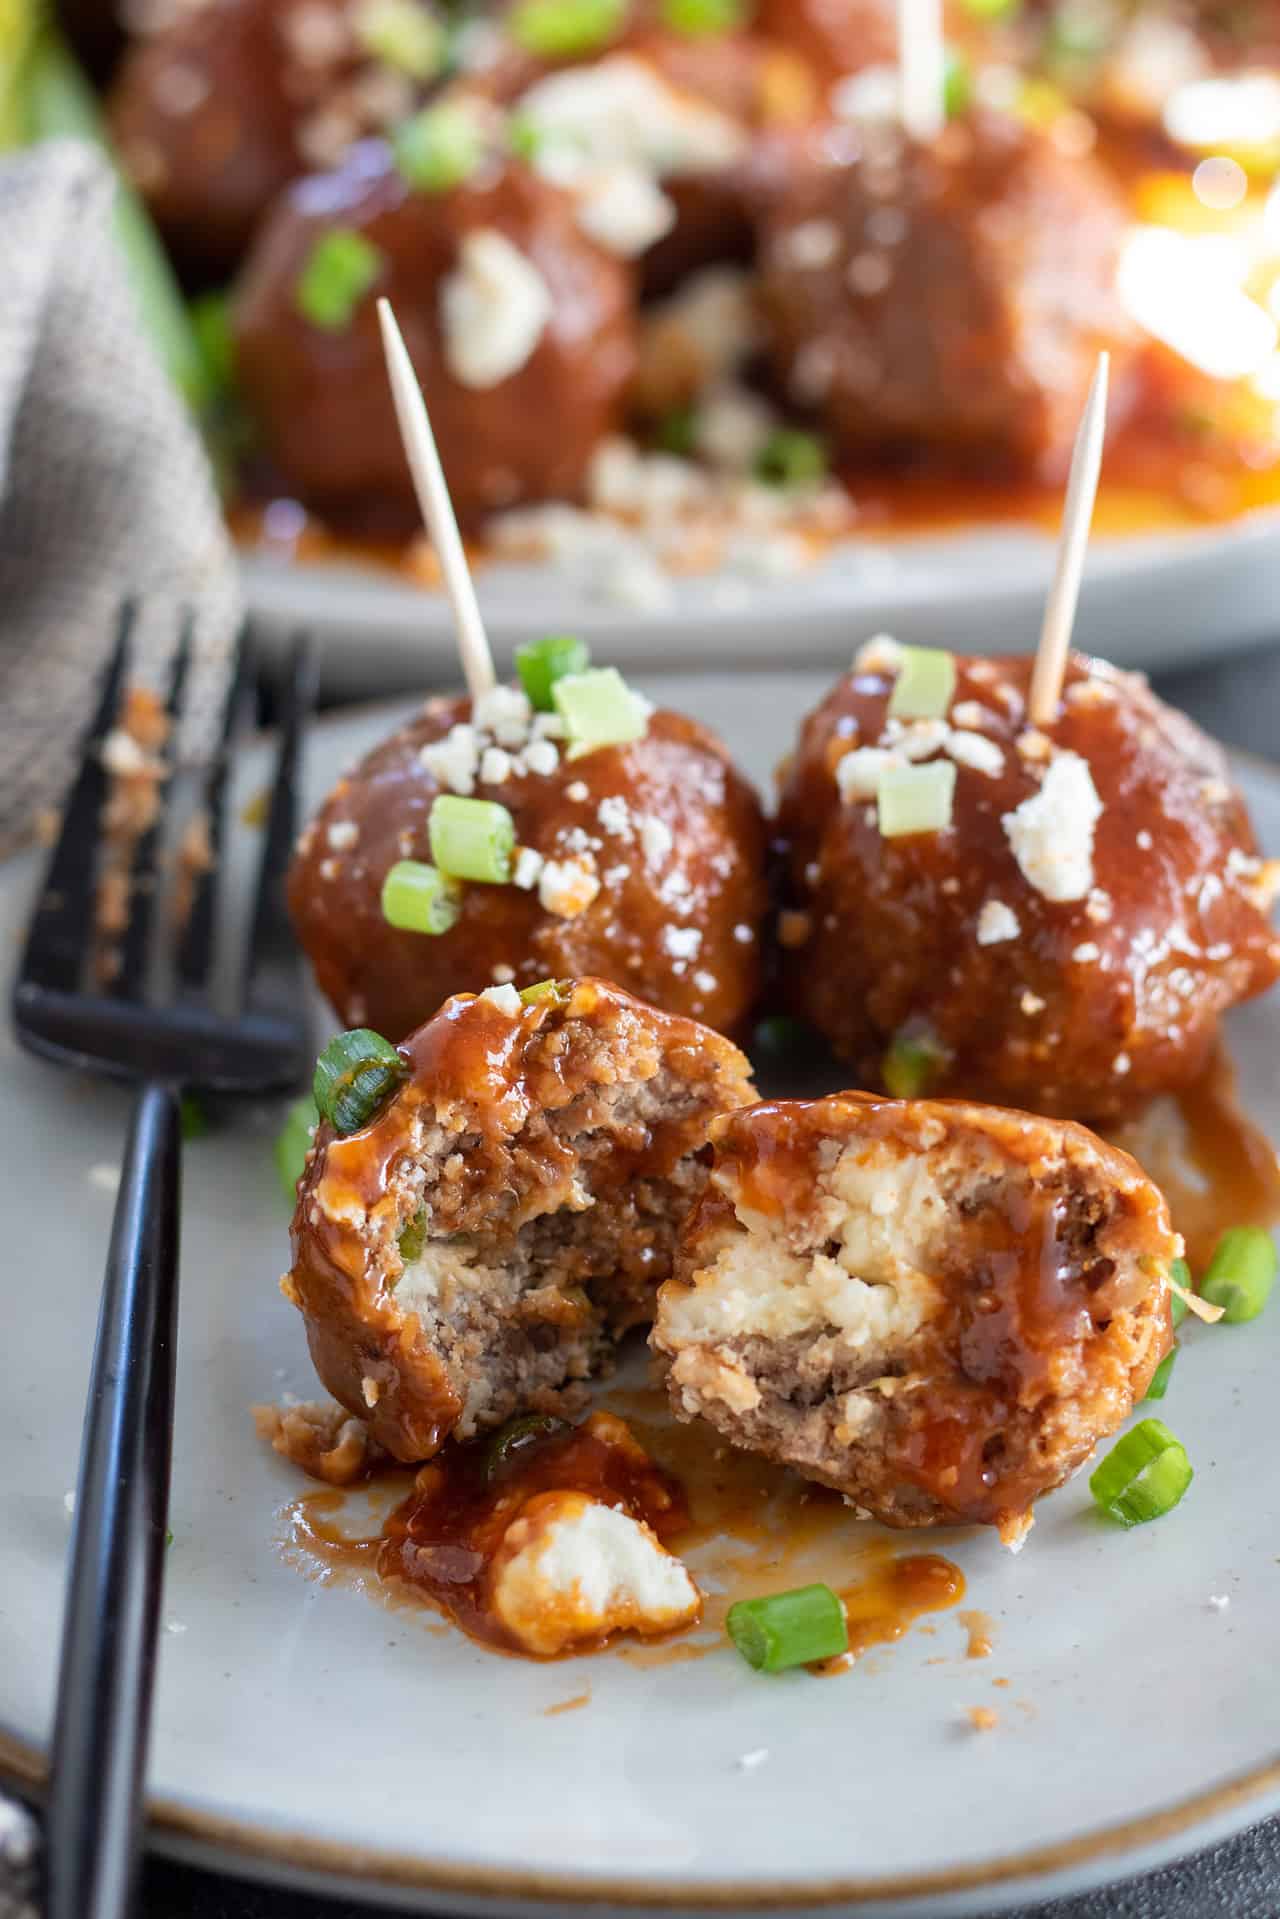 A small plate with 3 small meatballs on it. One meatball is cut open and it's stuffed with blue cheese. The other two meatballs have toothpicks in them for appetizers. There's a black fork on the plate and a bigger plate in the background with more buffalo chicken meatballs.